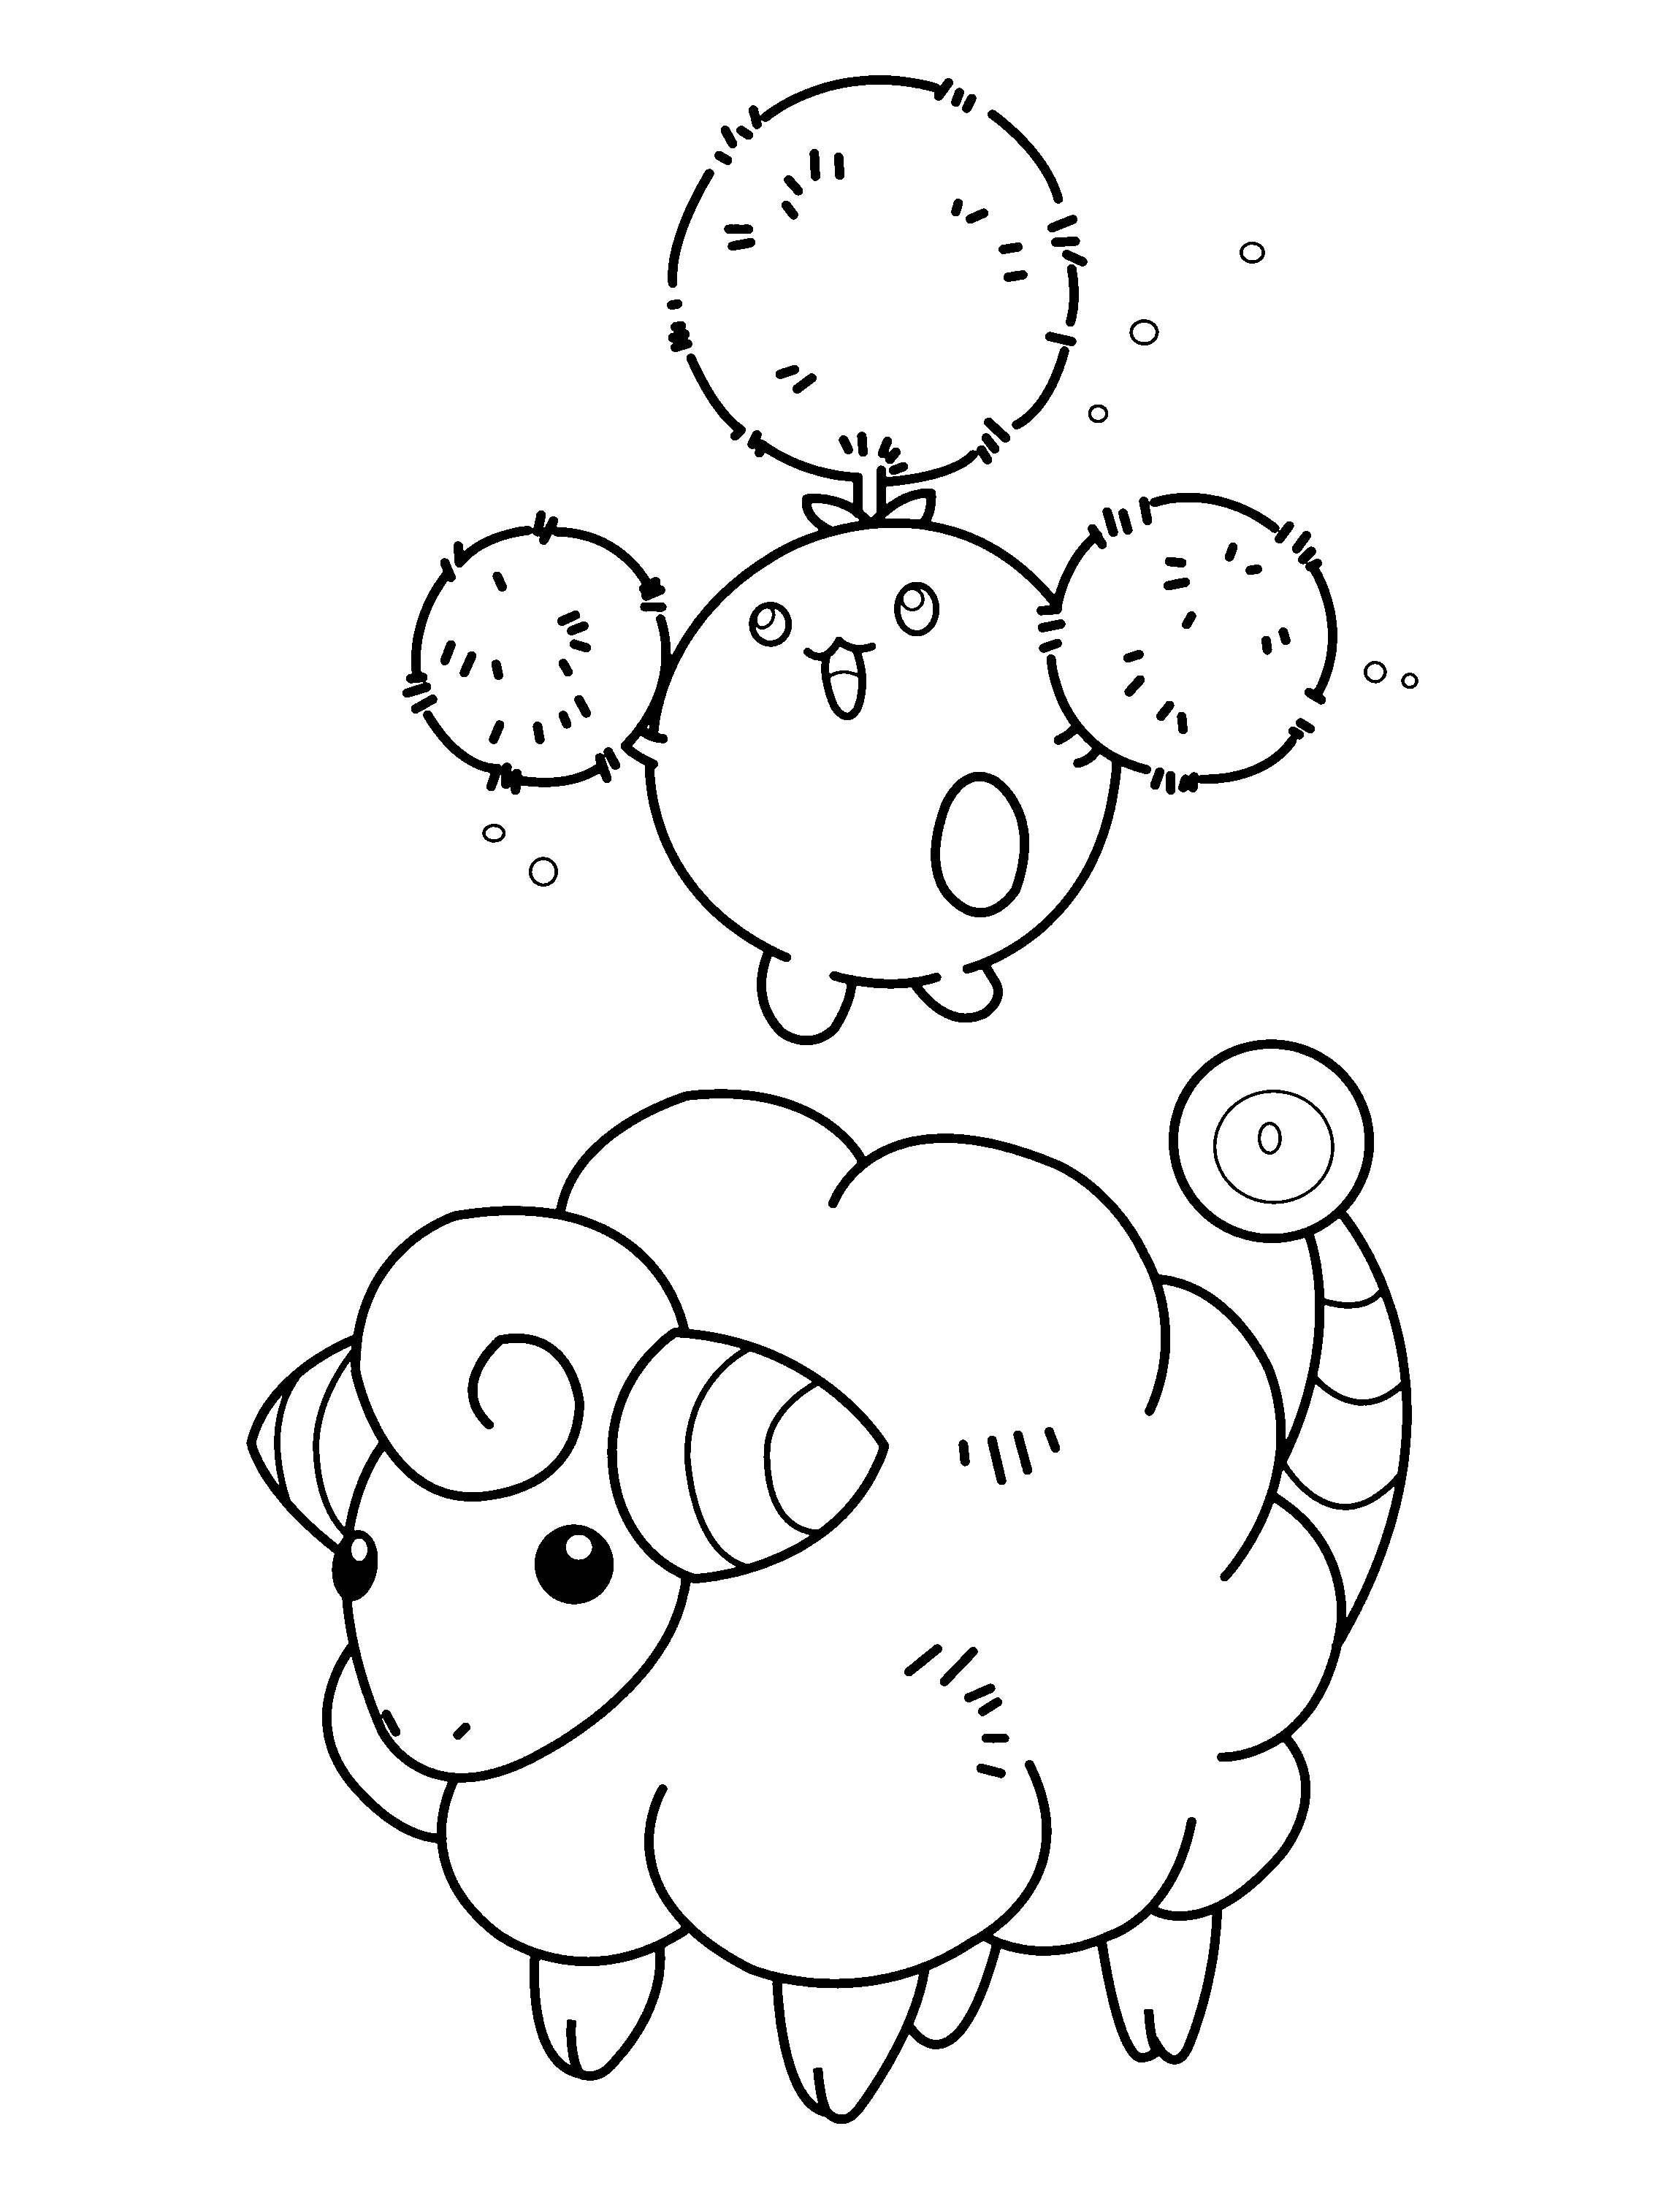 animated-coloring-pages-pokemon-image-0316